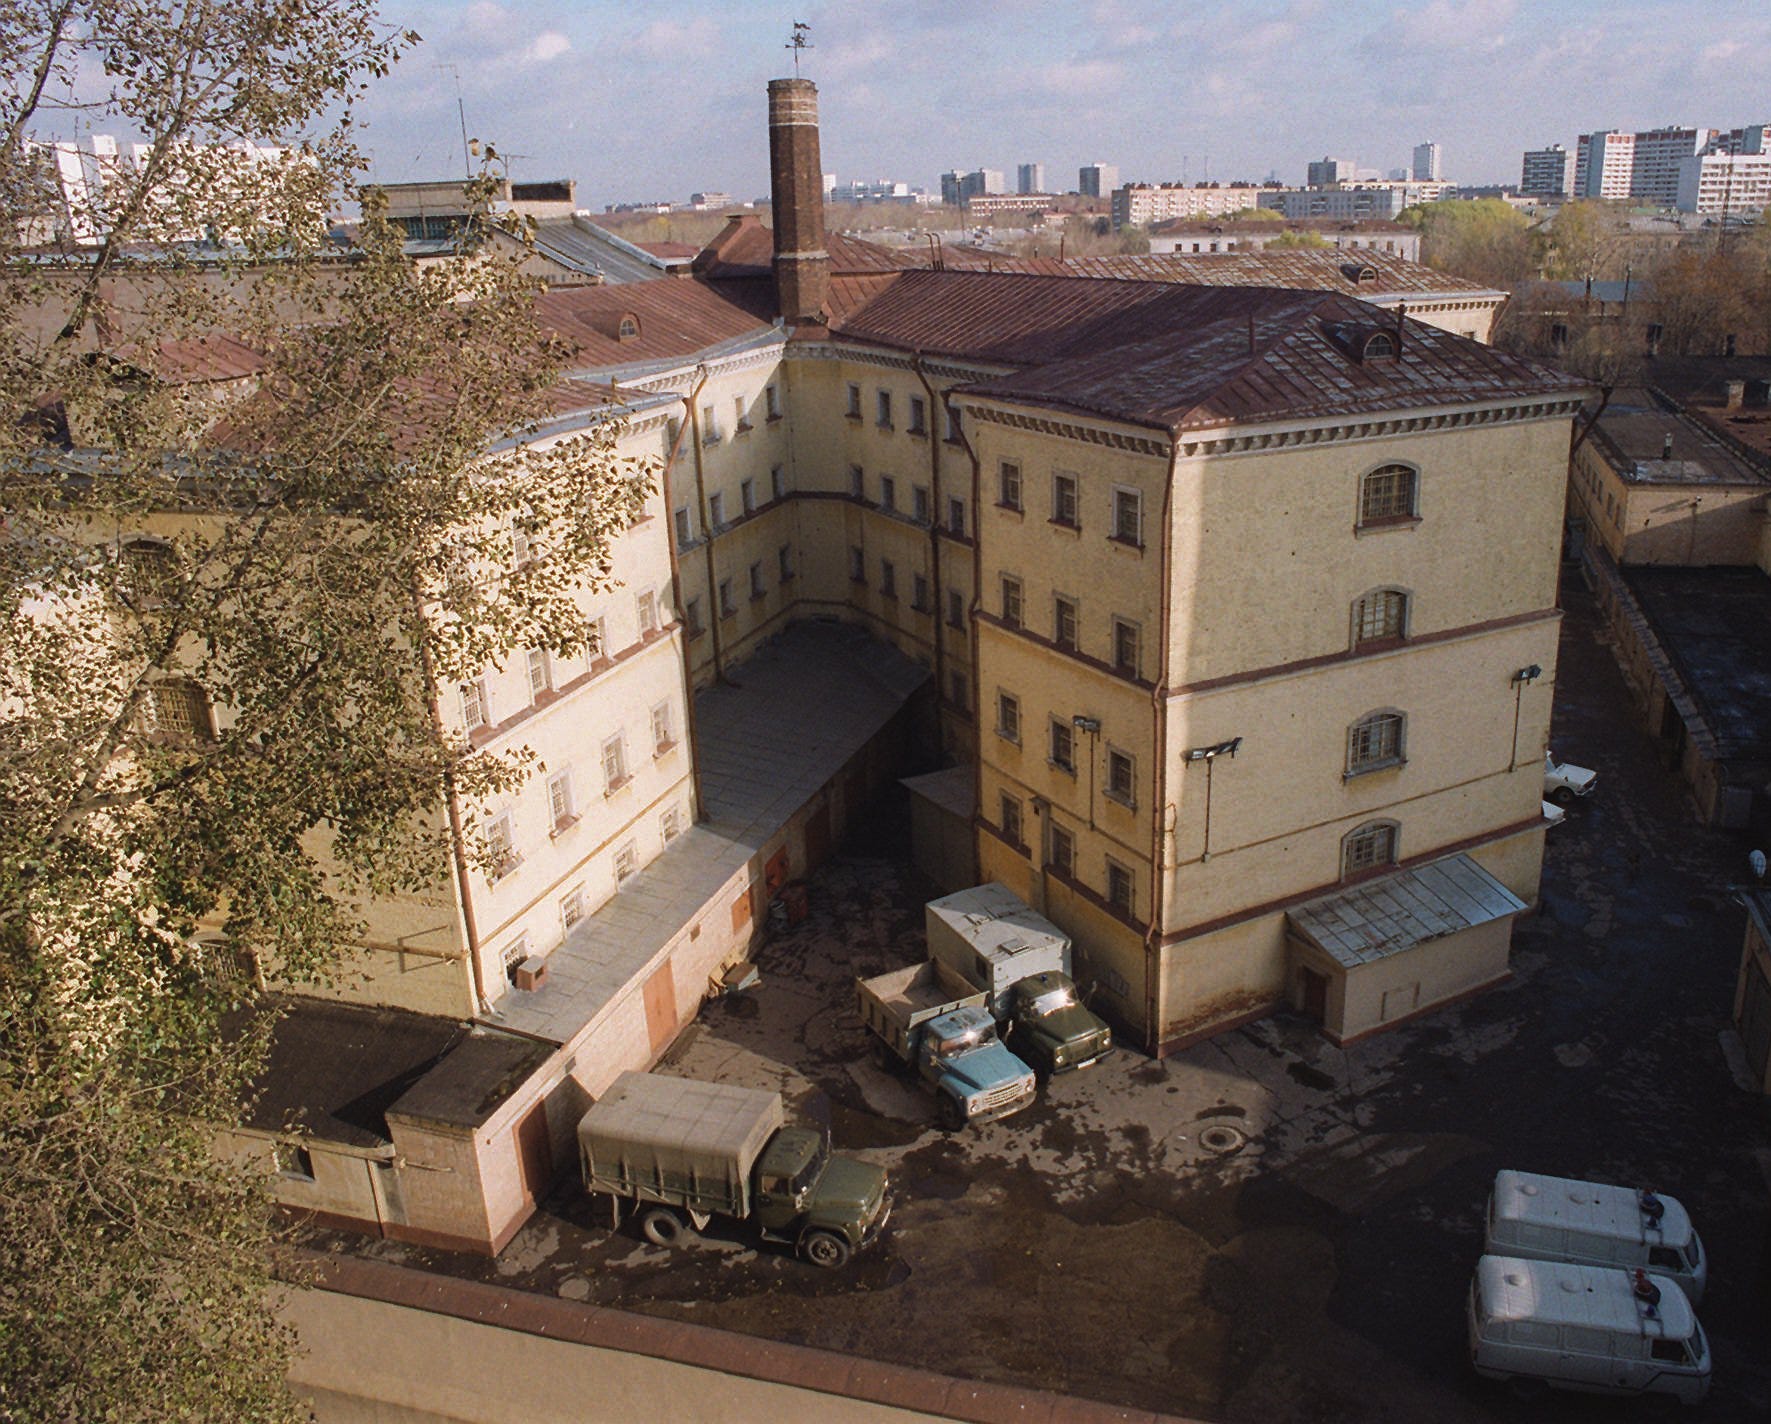 This 1995 photo shows an overview of Moscow's Lefortovo Prison.